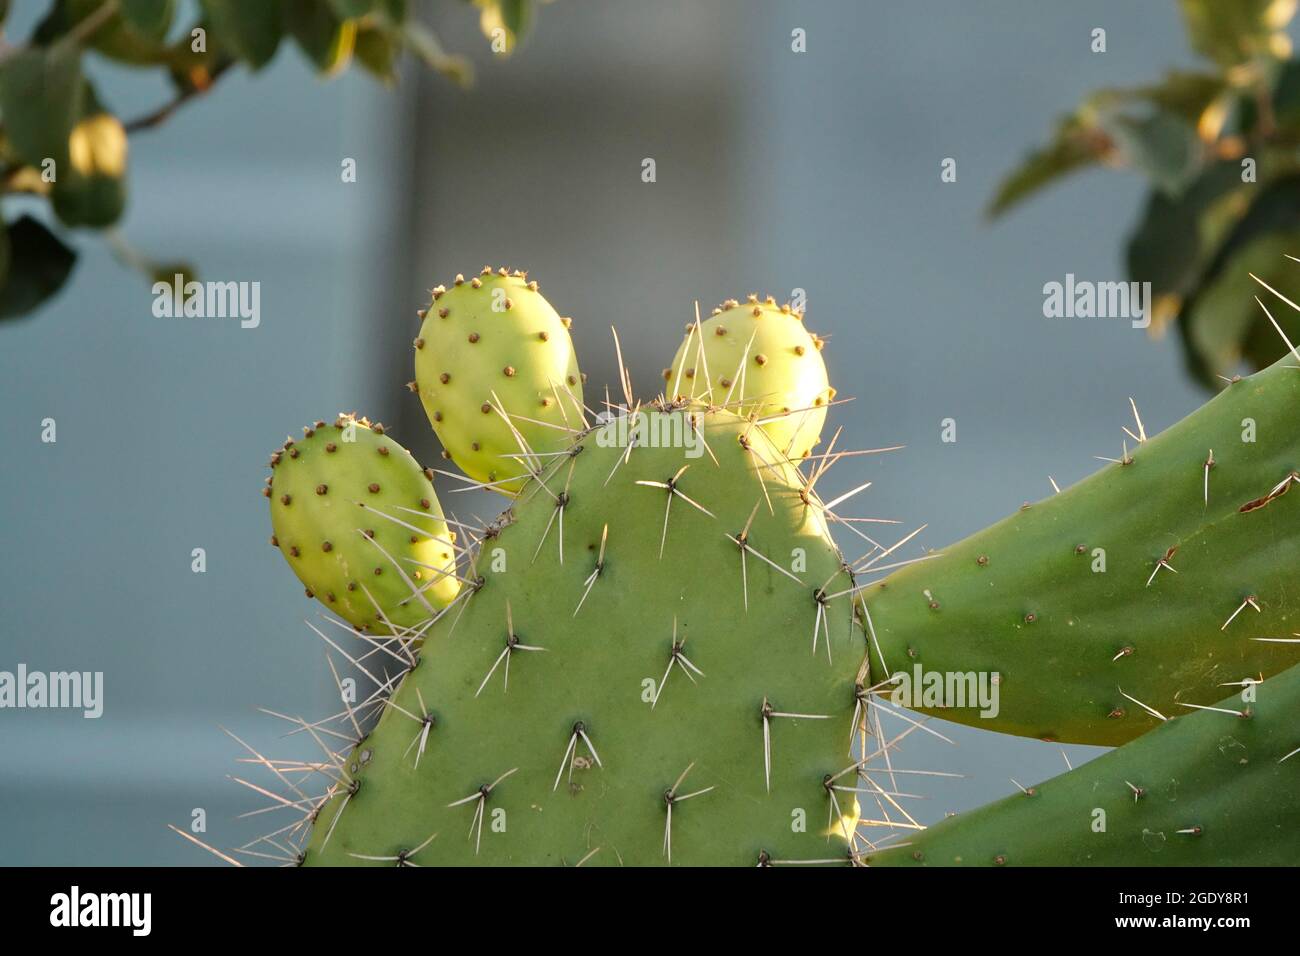 Prickly pear (Opuntia ficus-indica) with figs still green Stock Photo